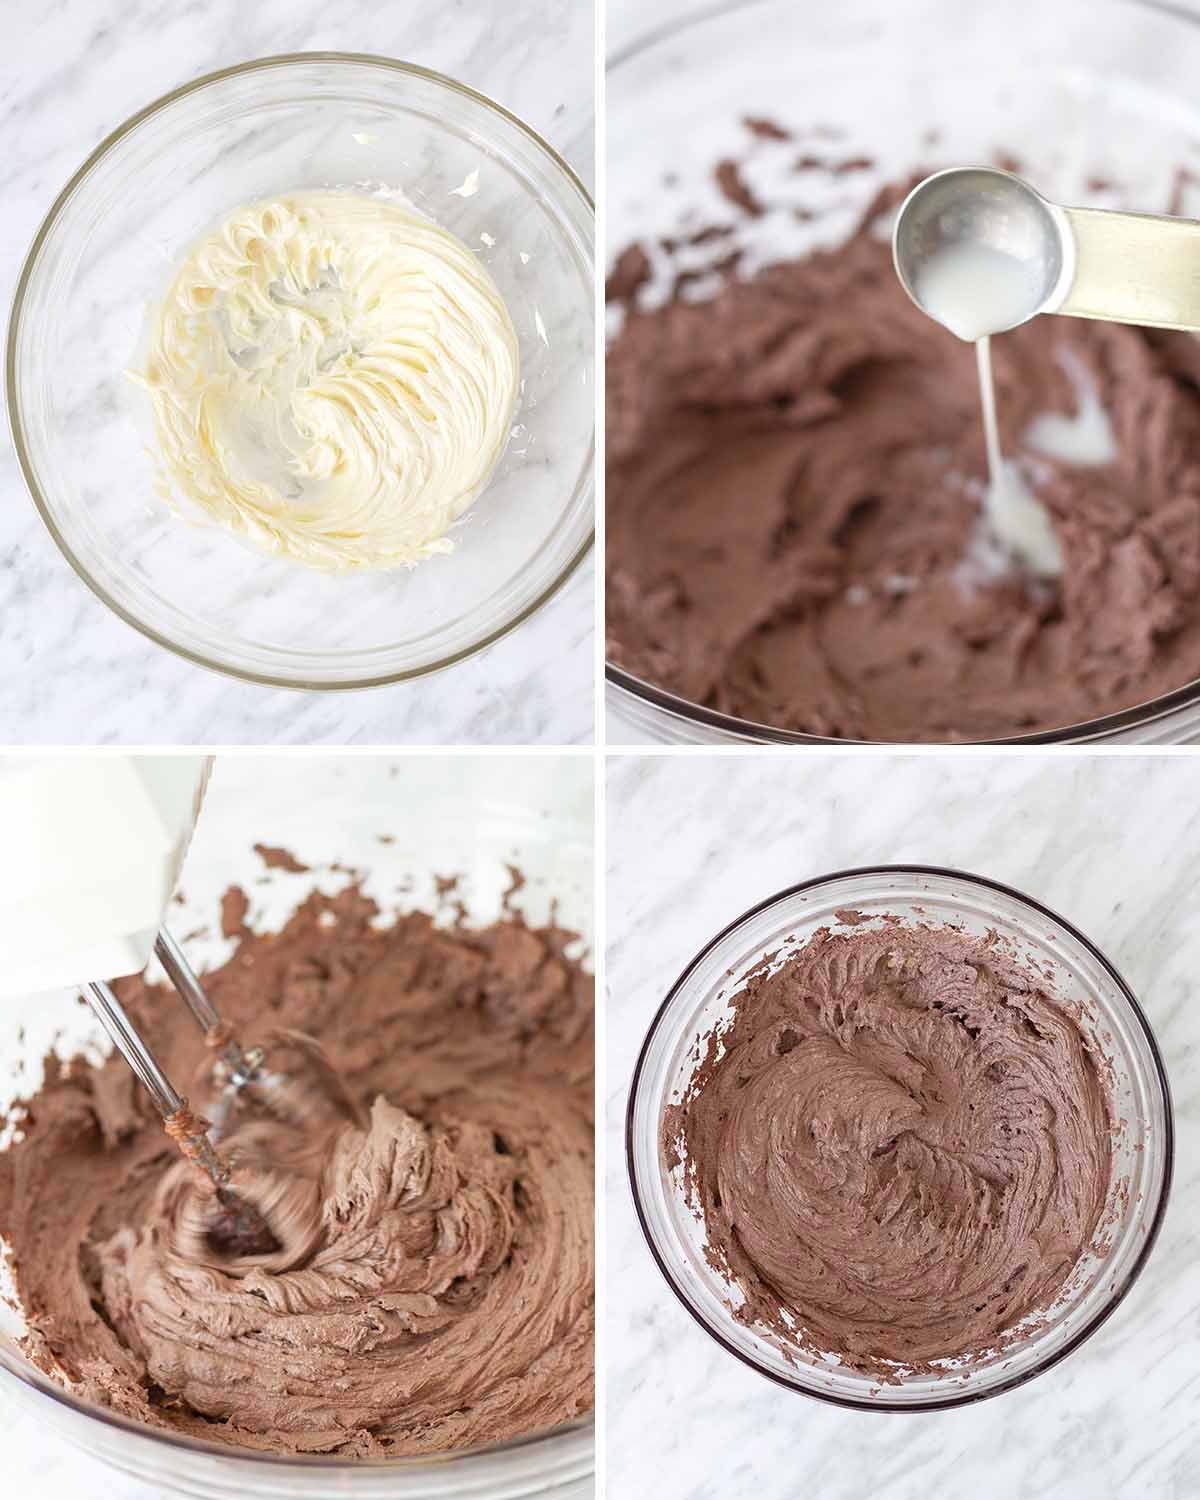 A collage of four images showing the sequence of steps needed to make vegan chocolate icing.